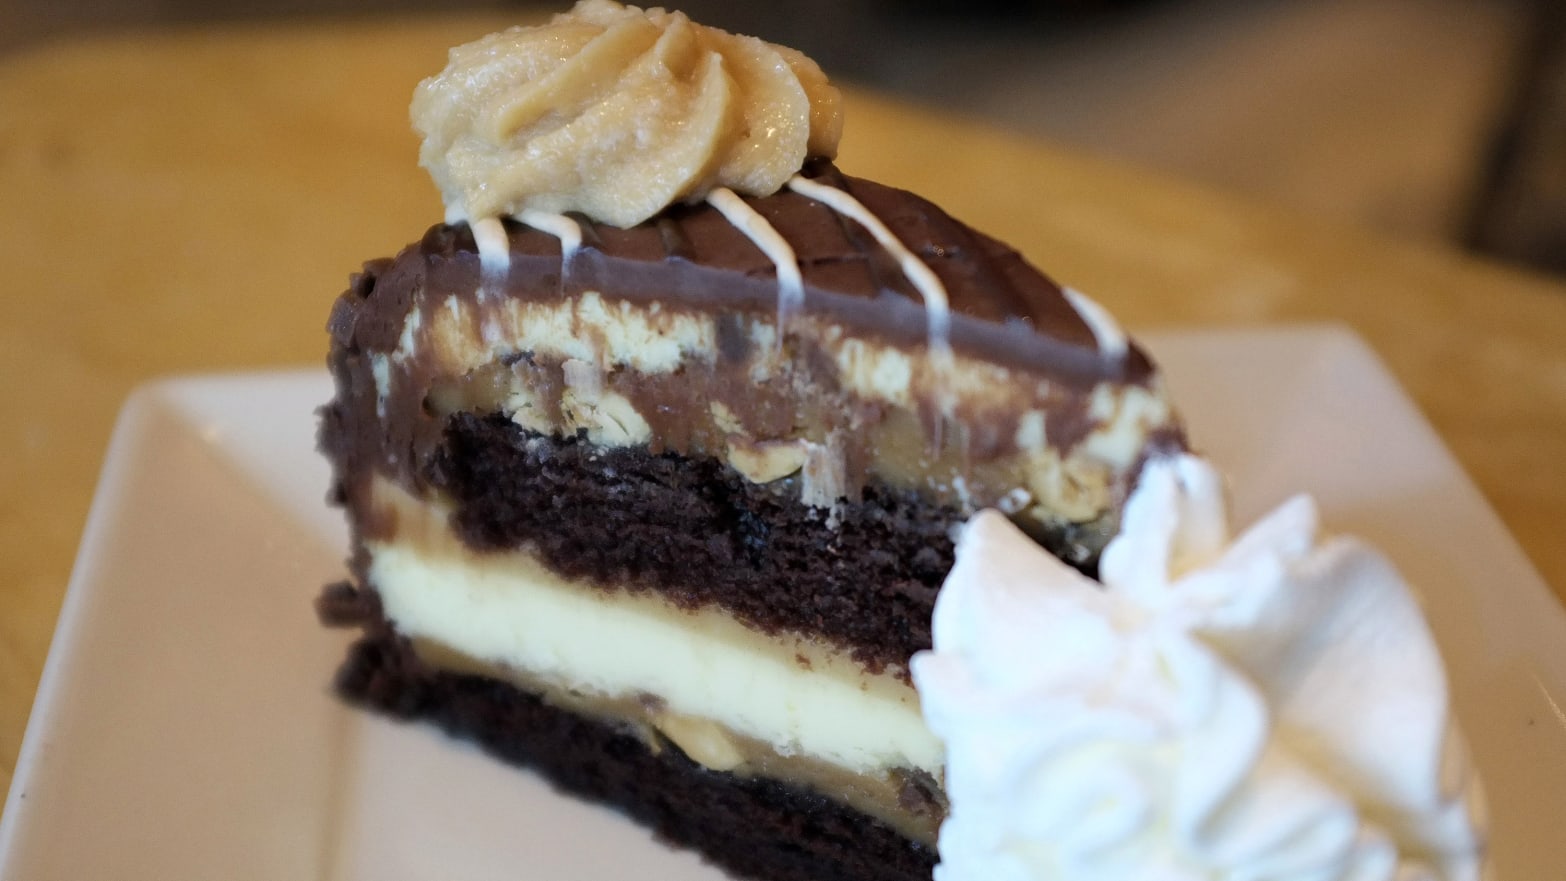 A slice of Reese’s peanut butter chocolate cake cheesecake is pictured at a Cheescake Factory restaurant in Boston, Massachusetts, July 30, 2014.